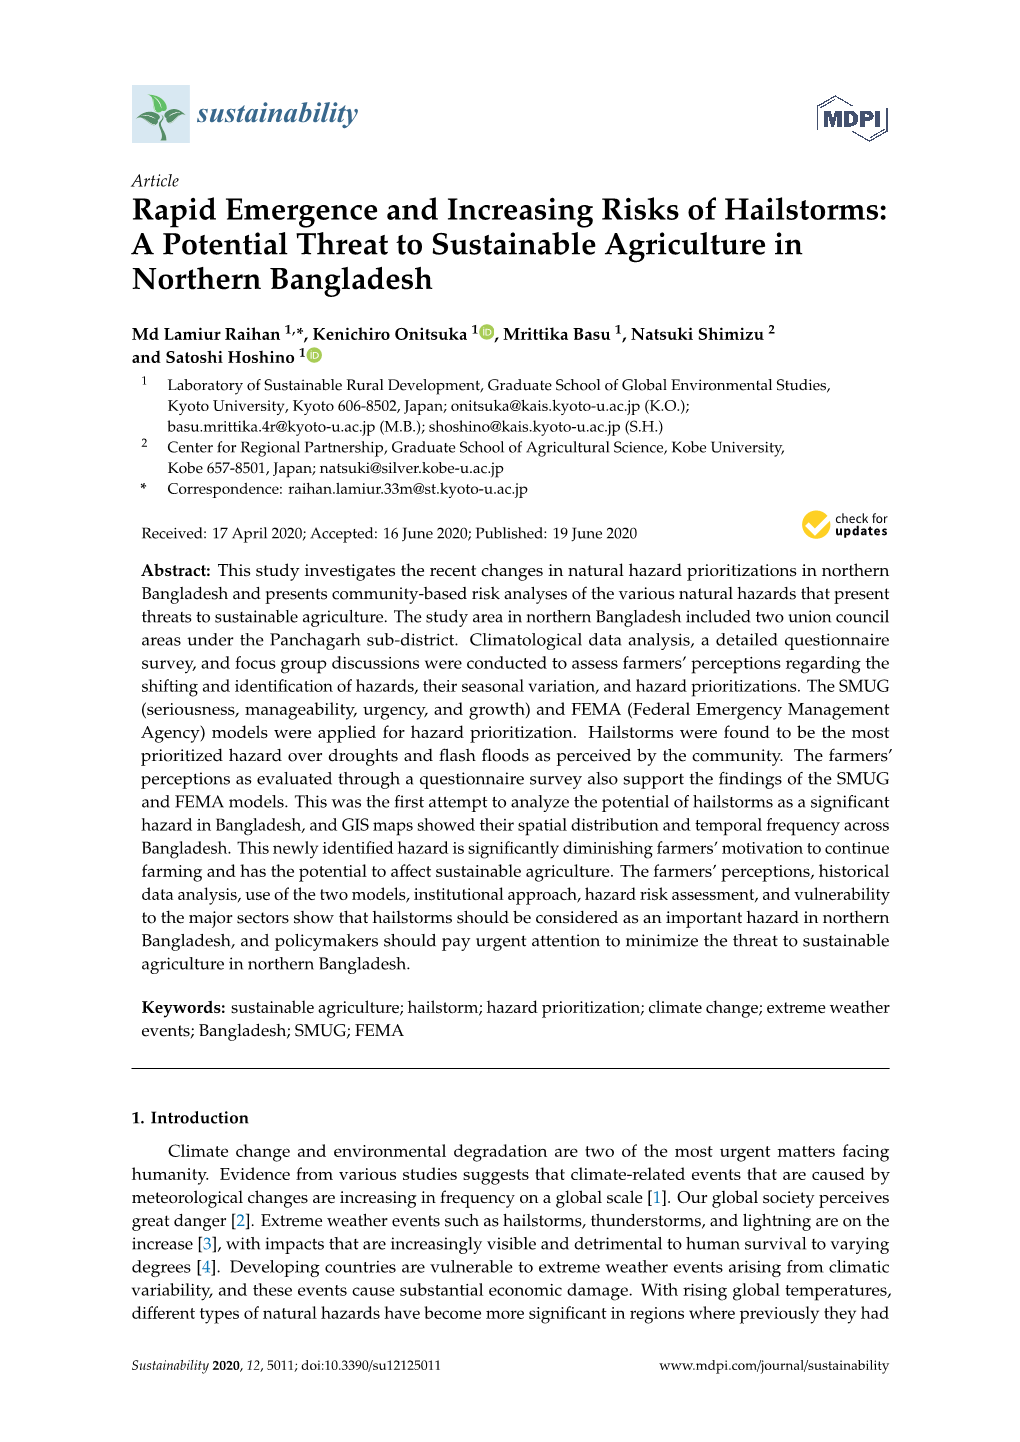 A Potential Threat to Sustainable Agriculture in Northern Bangladesh